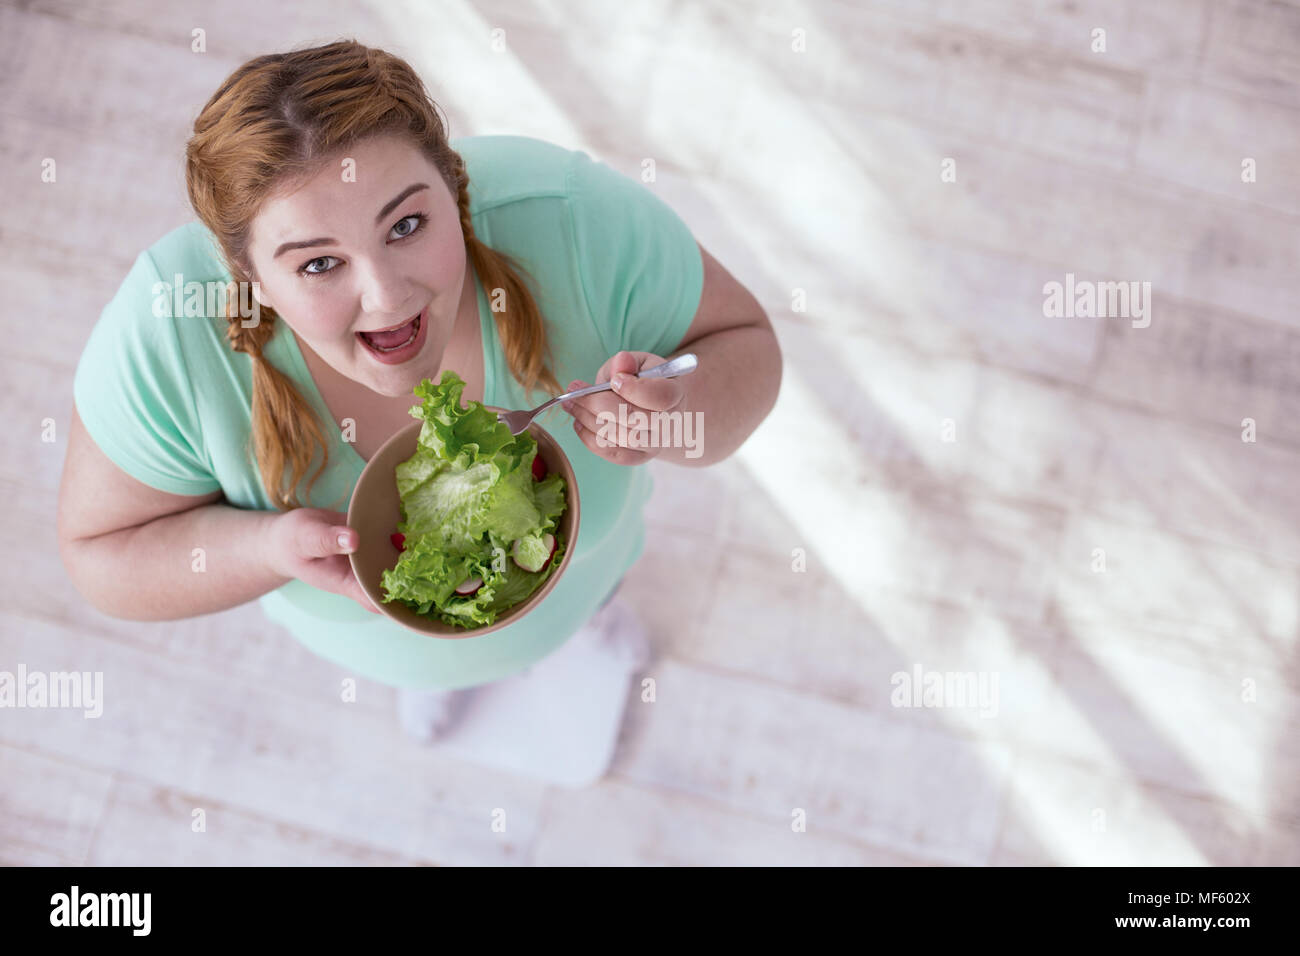 Stout red-head woman eating healthy food Stock Photo